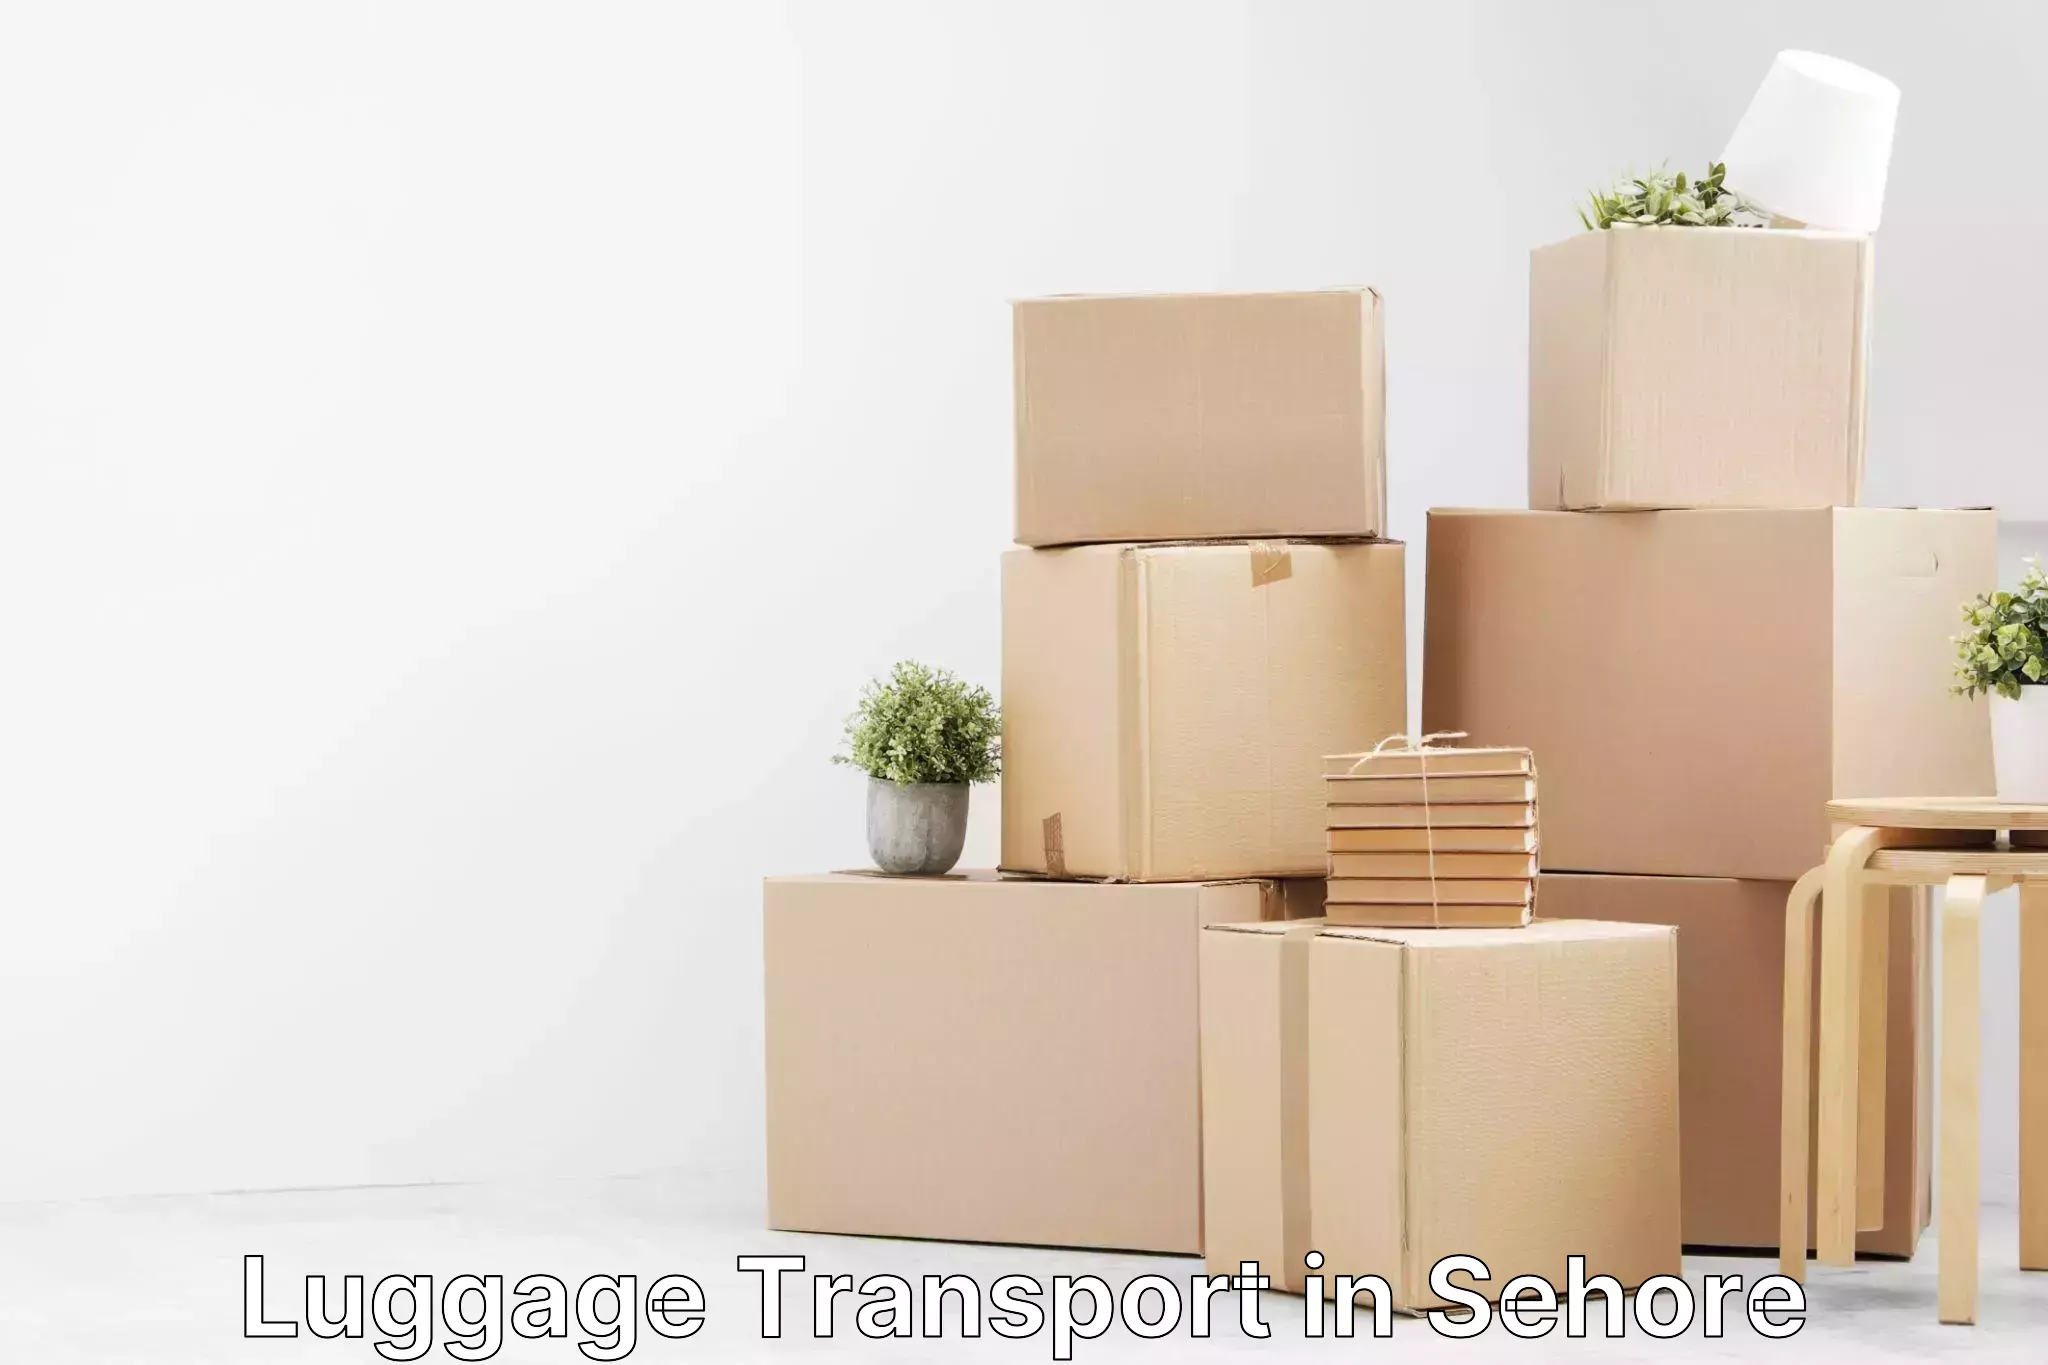 Hassle-free luggage shipping in Sehore